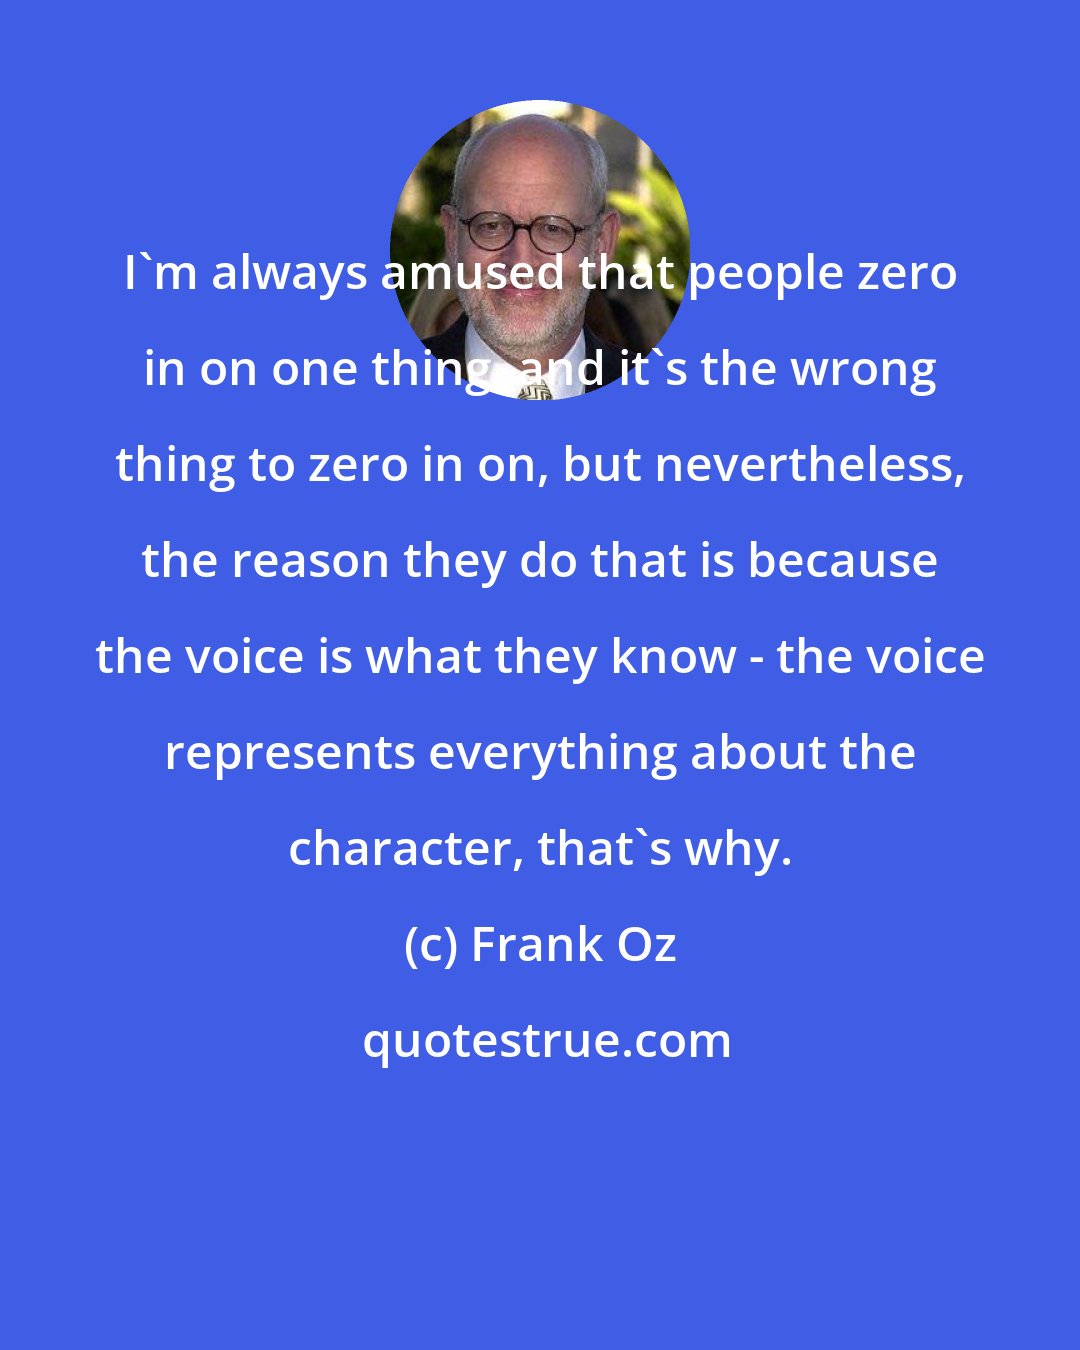 Frank Oz: I'm always amused that people zero in on one thing, and it's the wrong thing to zero in on, but nevertheless, the reason they do that is because the voice is what they know - the voice represents everything about the character, that's why.